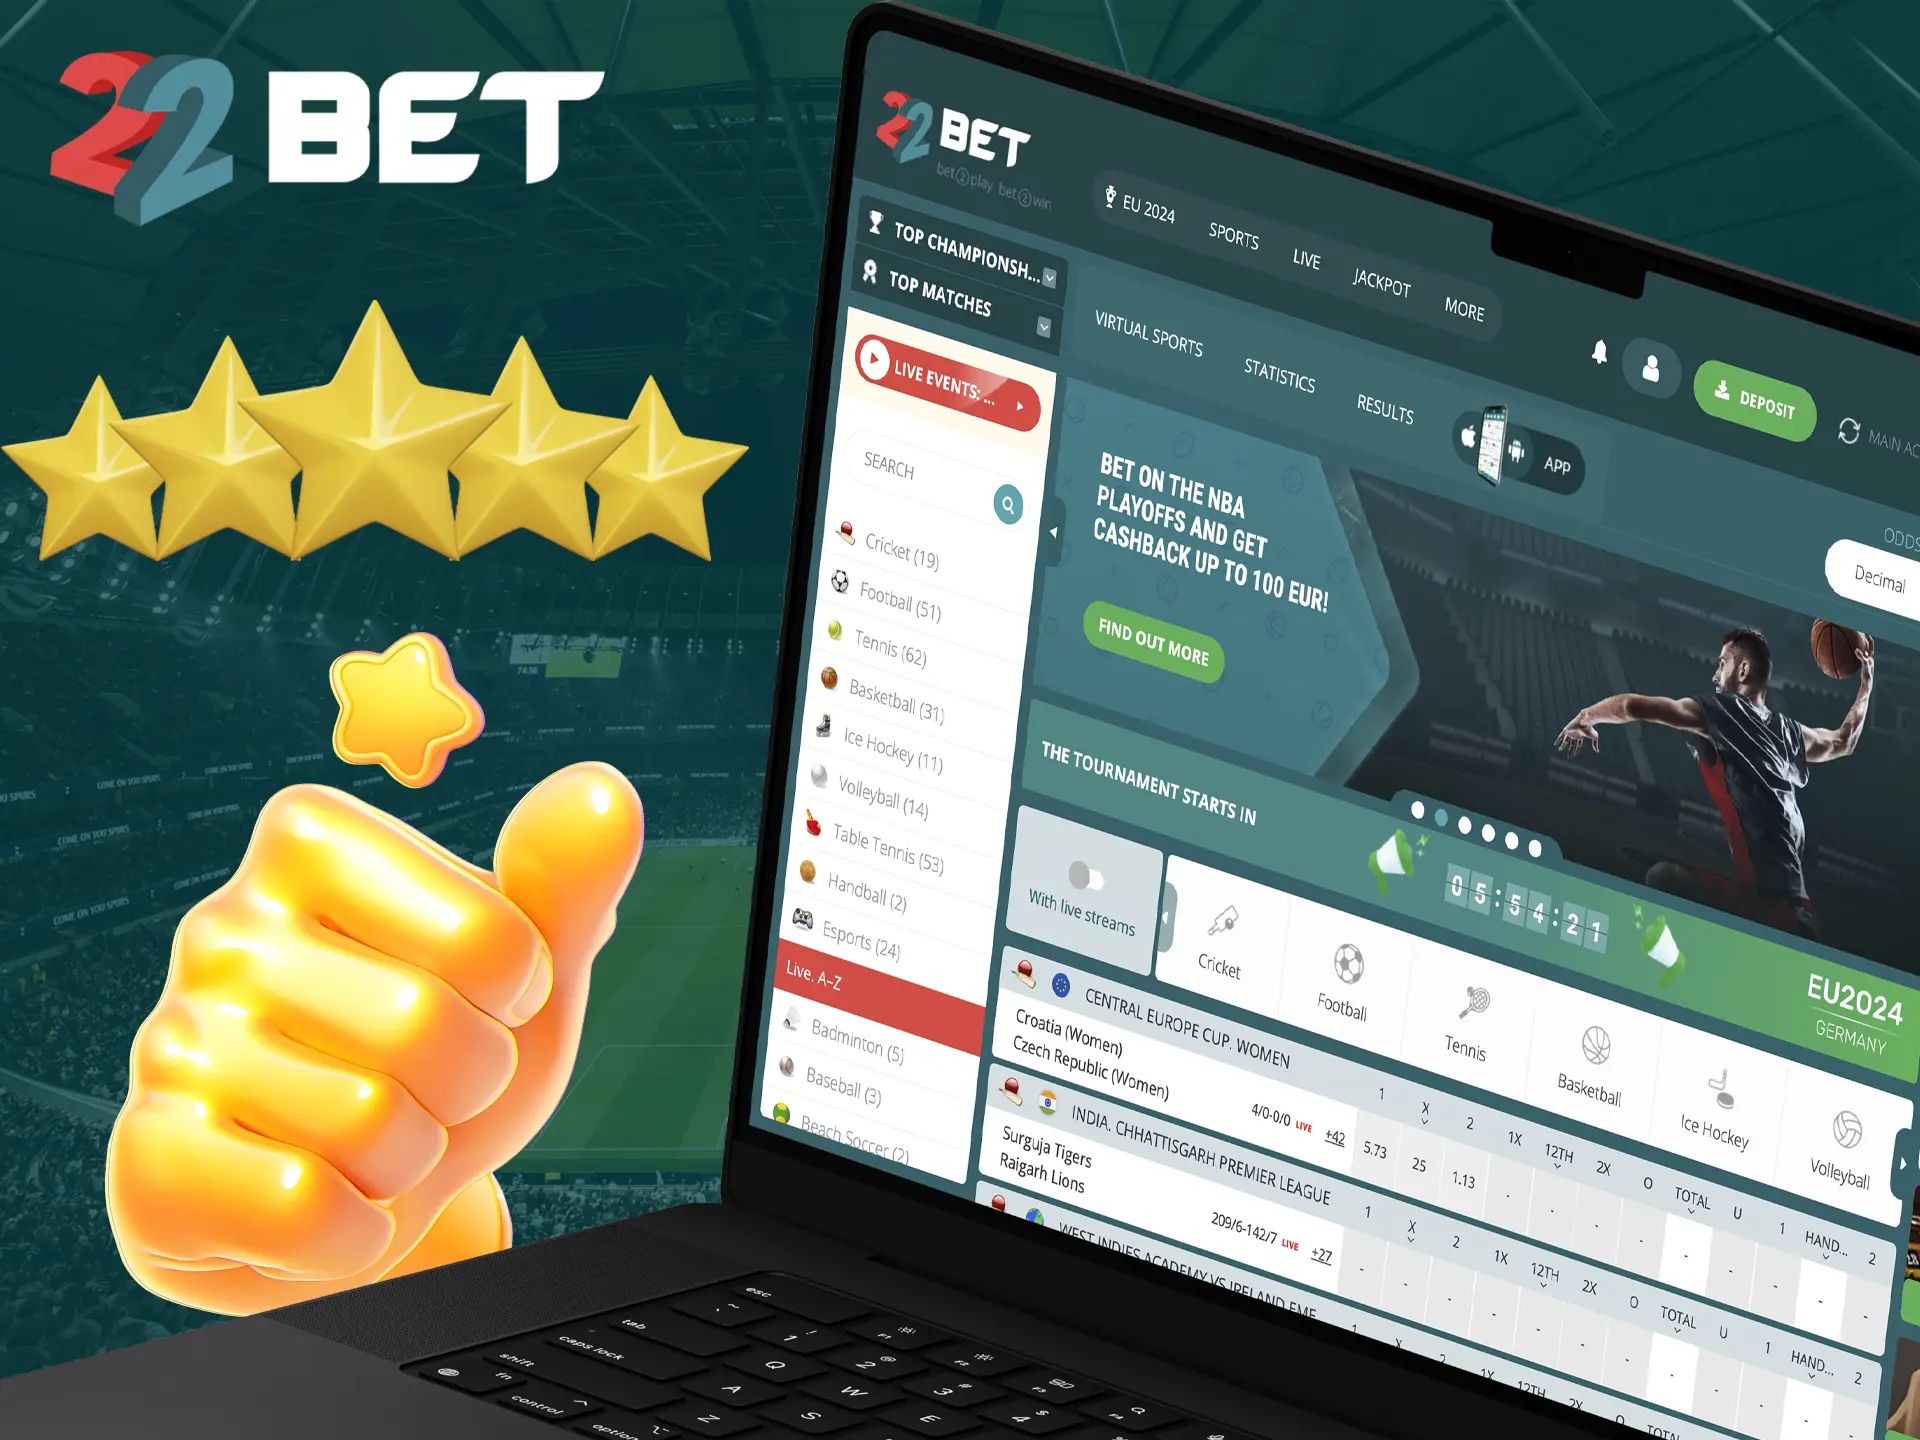 Every football fan knows that the bookmaker 22Bet is a quality and excellent service.